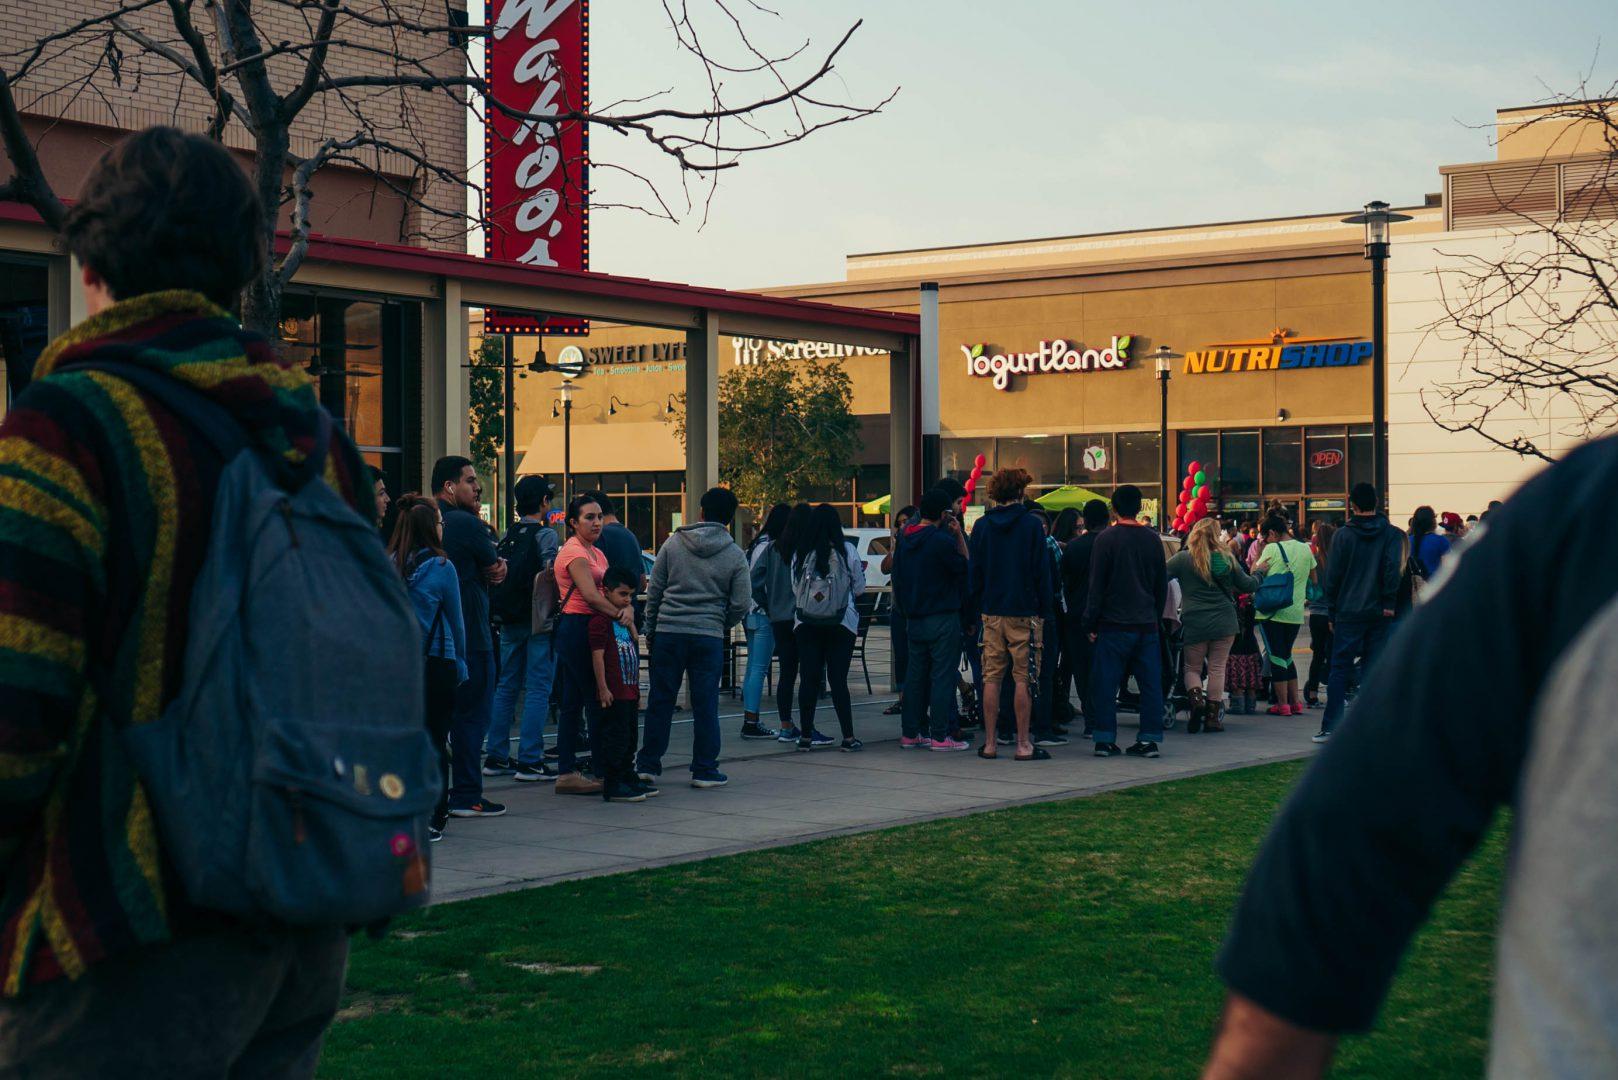 1.	Students and locals line up around Campus Point for Yogurtland’s Yogurt Giveaway on Tuesday afternoon Feb. 6. (Aly Honore/The Collegian)